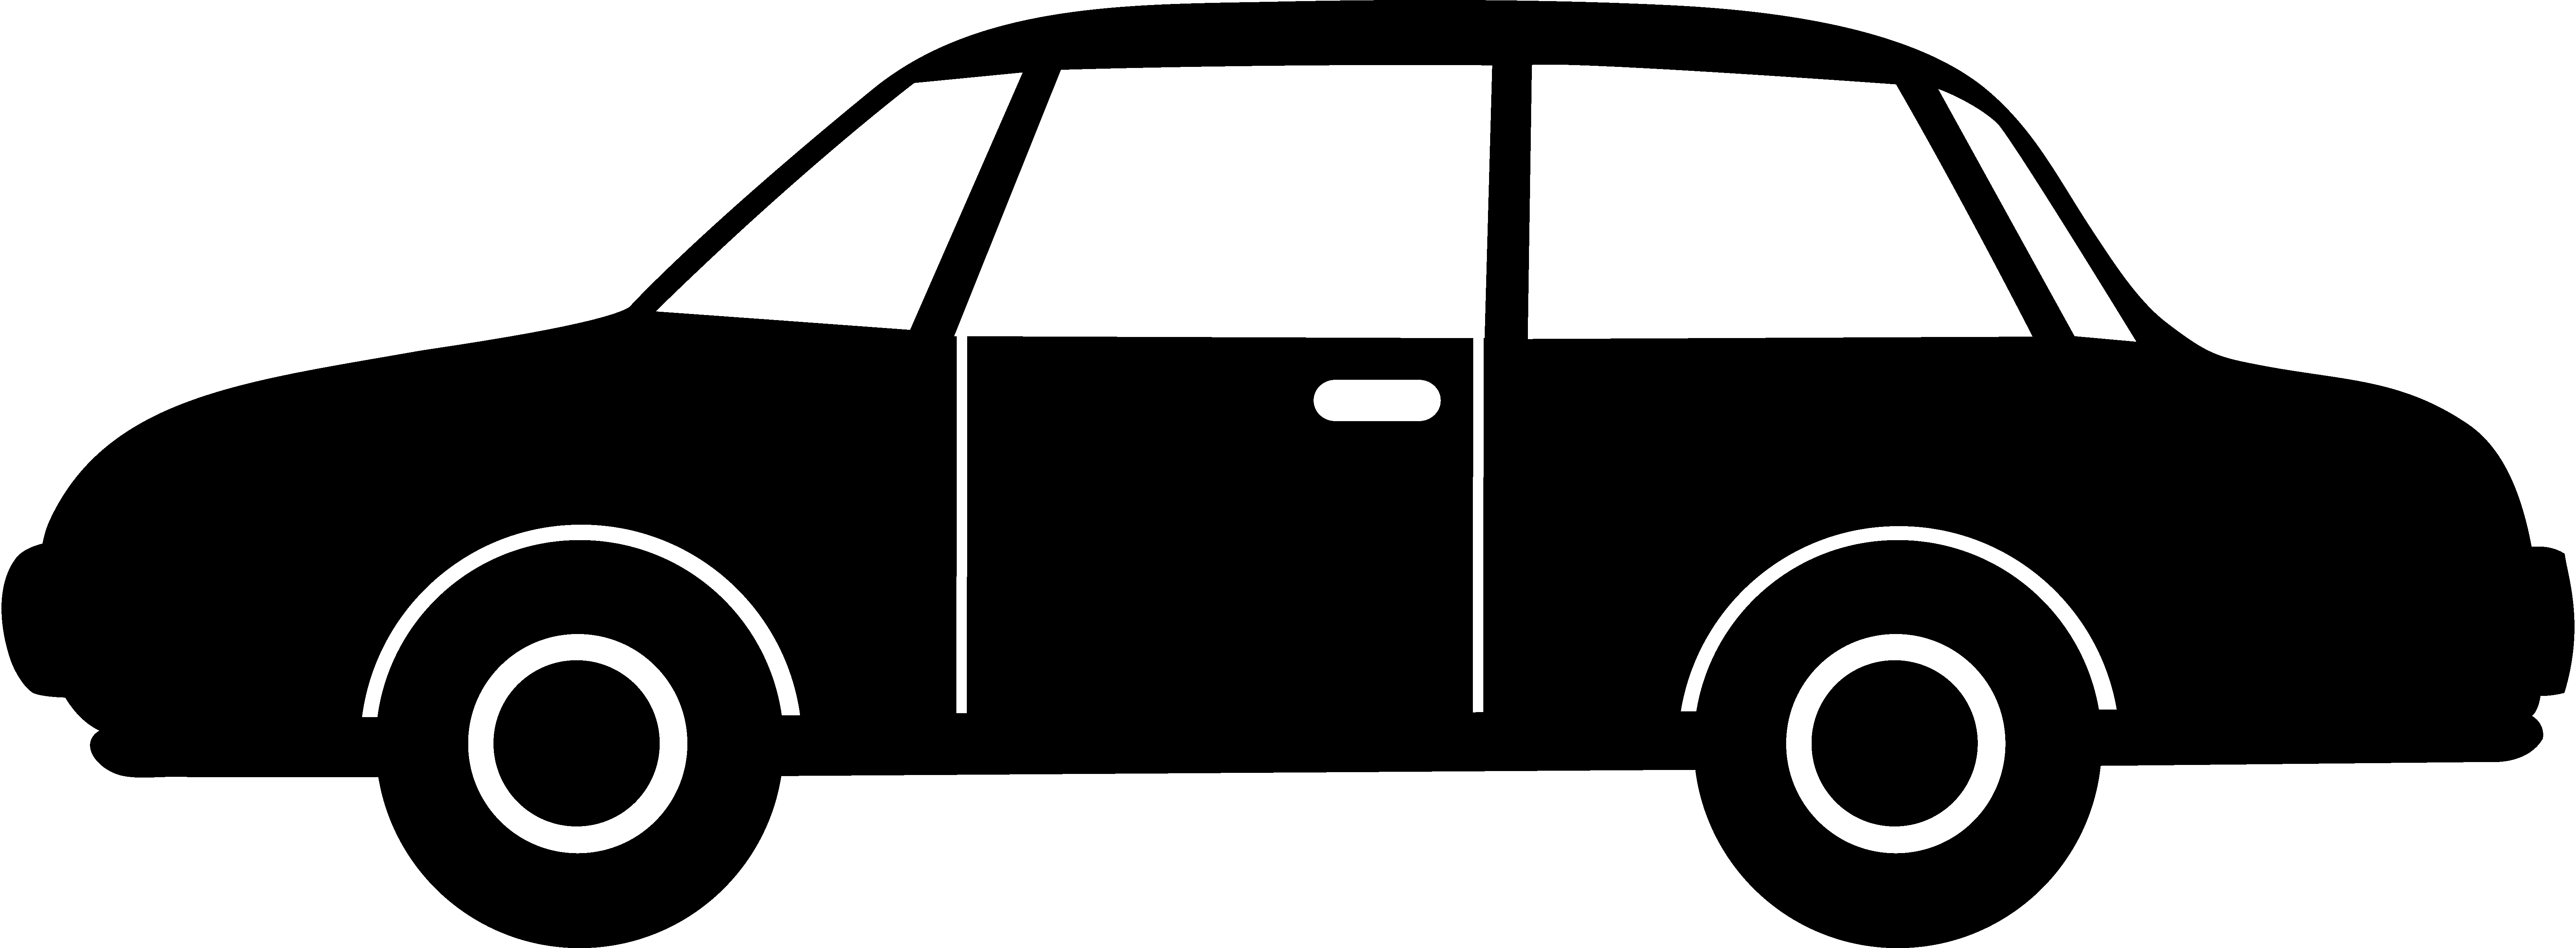 Car clipart black and white free clipart images